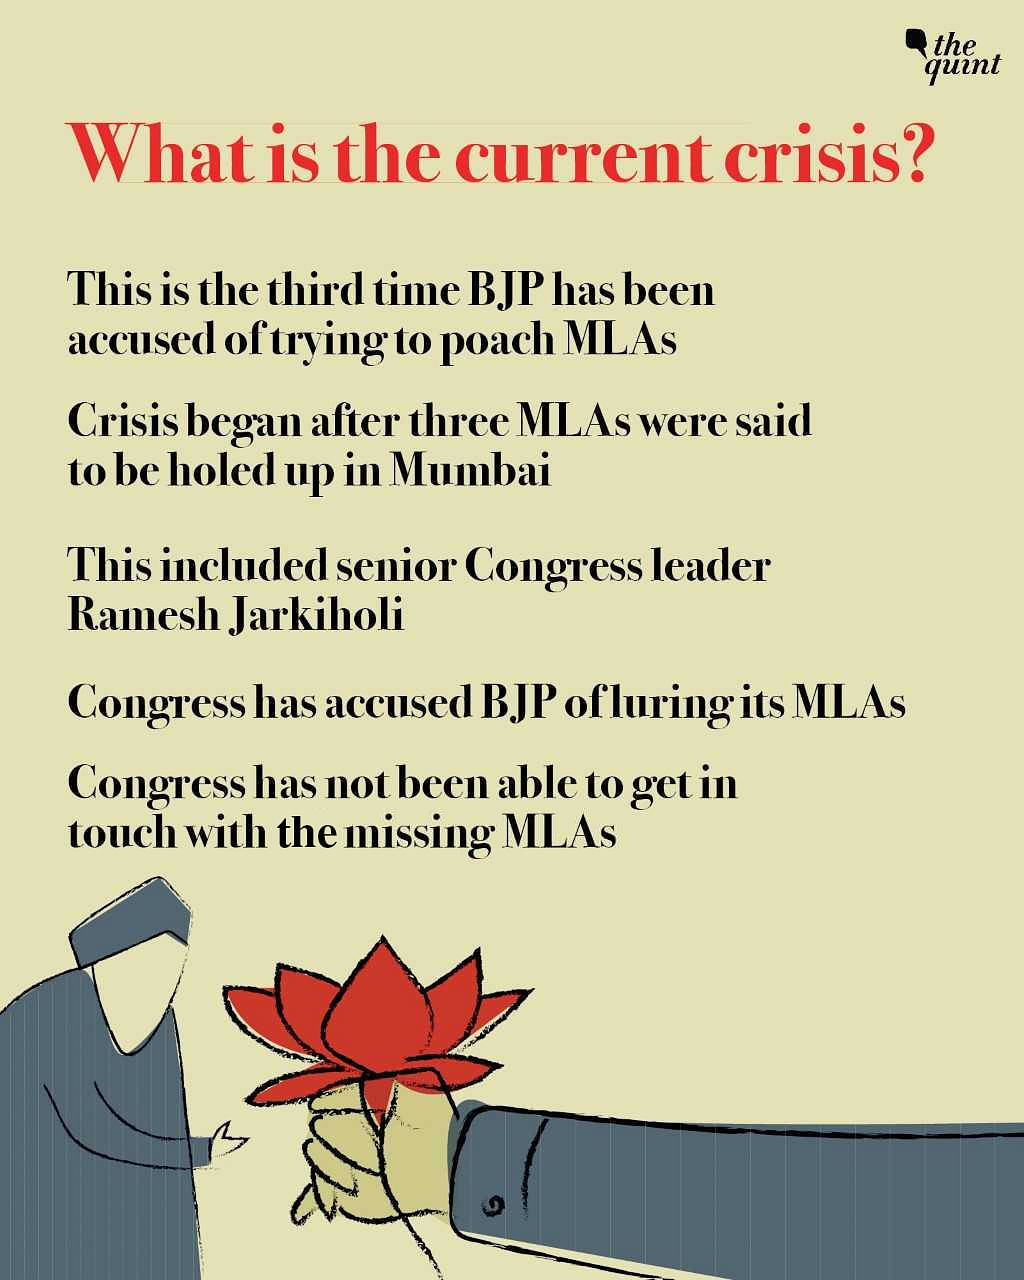  The BJP has been accused of trying to destabilise the state government before the general elections.